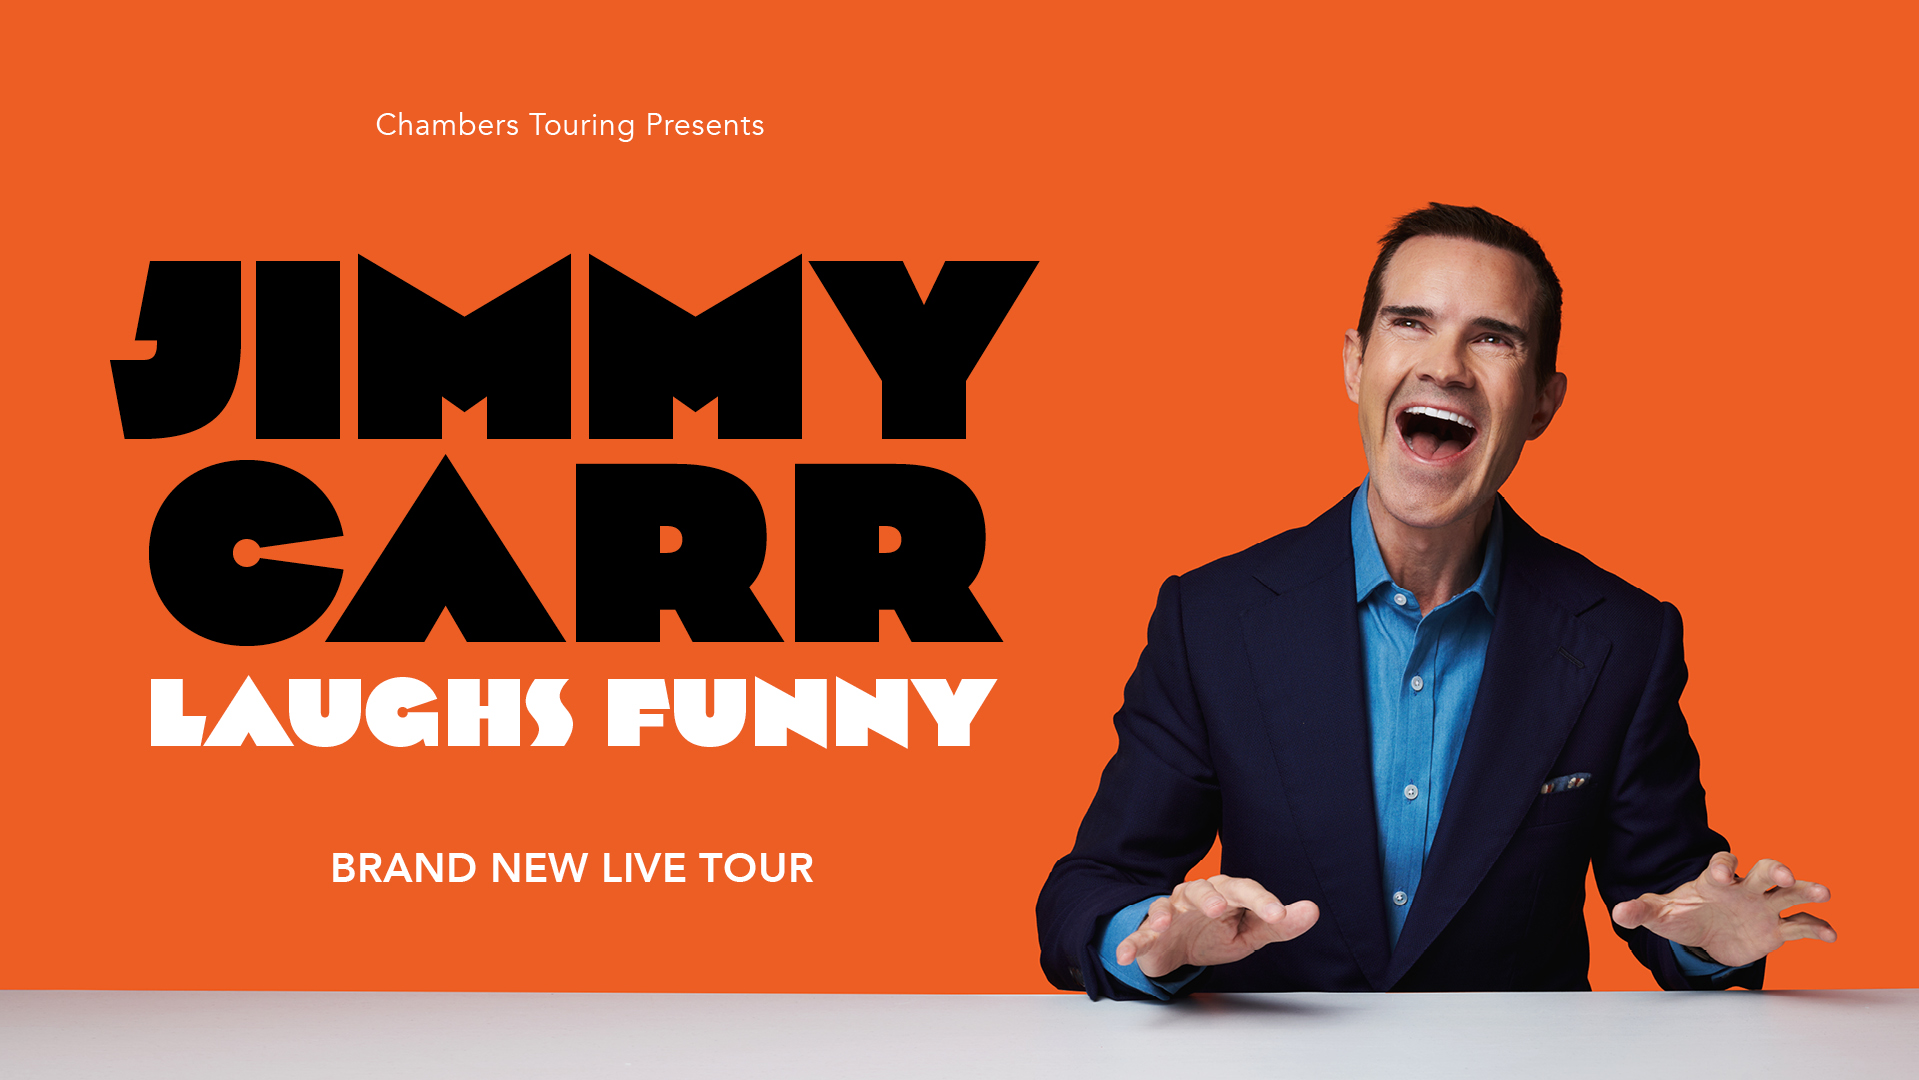 JimmyCarr LaughsFunny 1920x108